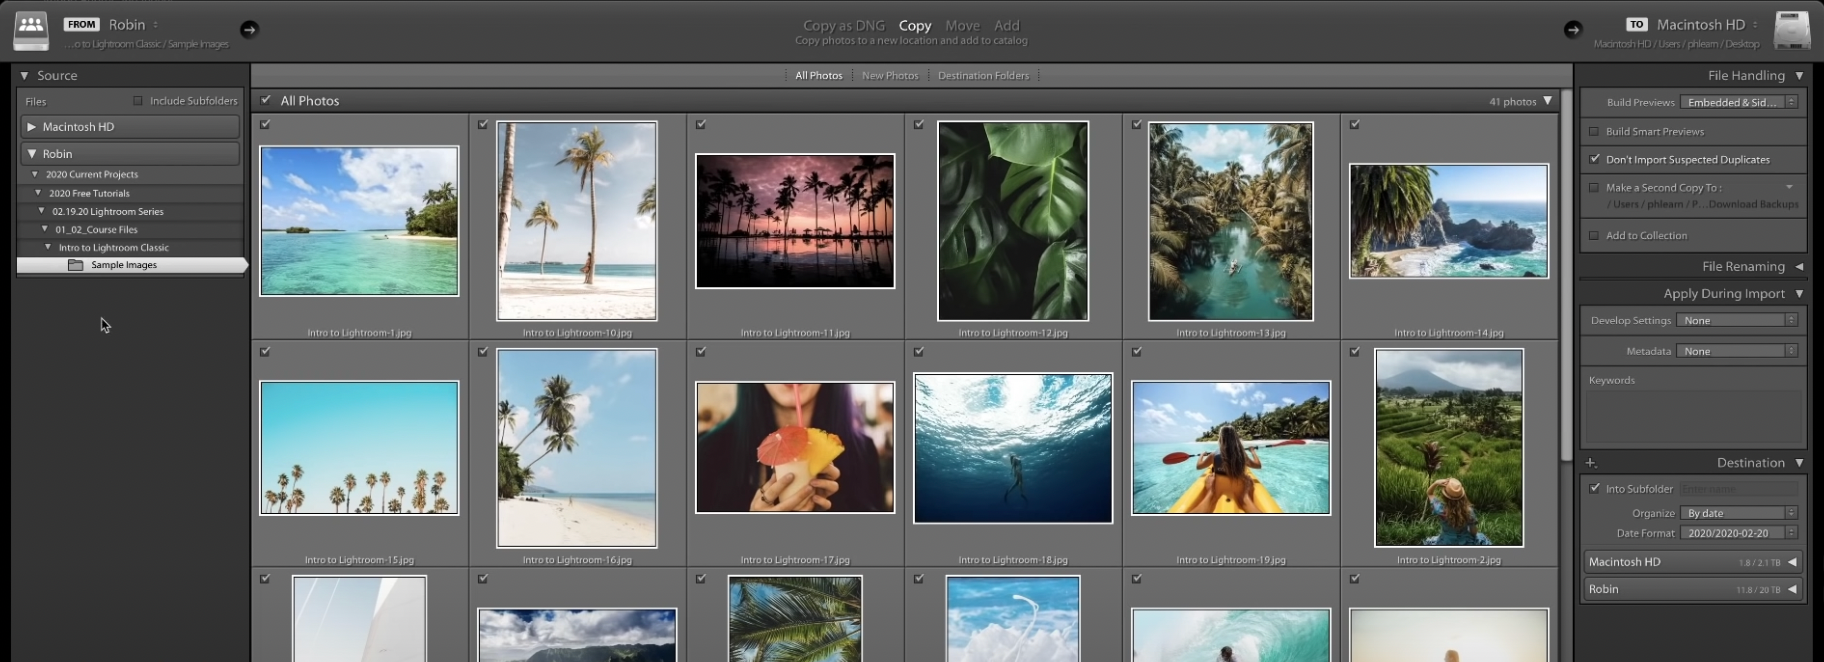 Select all images to import multiple photos at once.